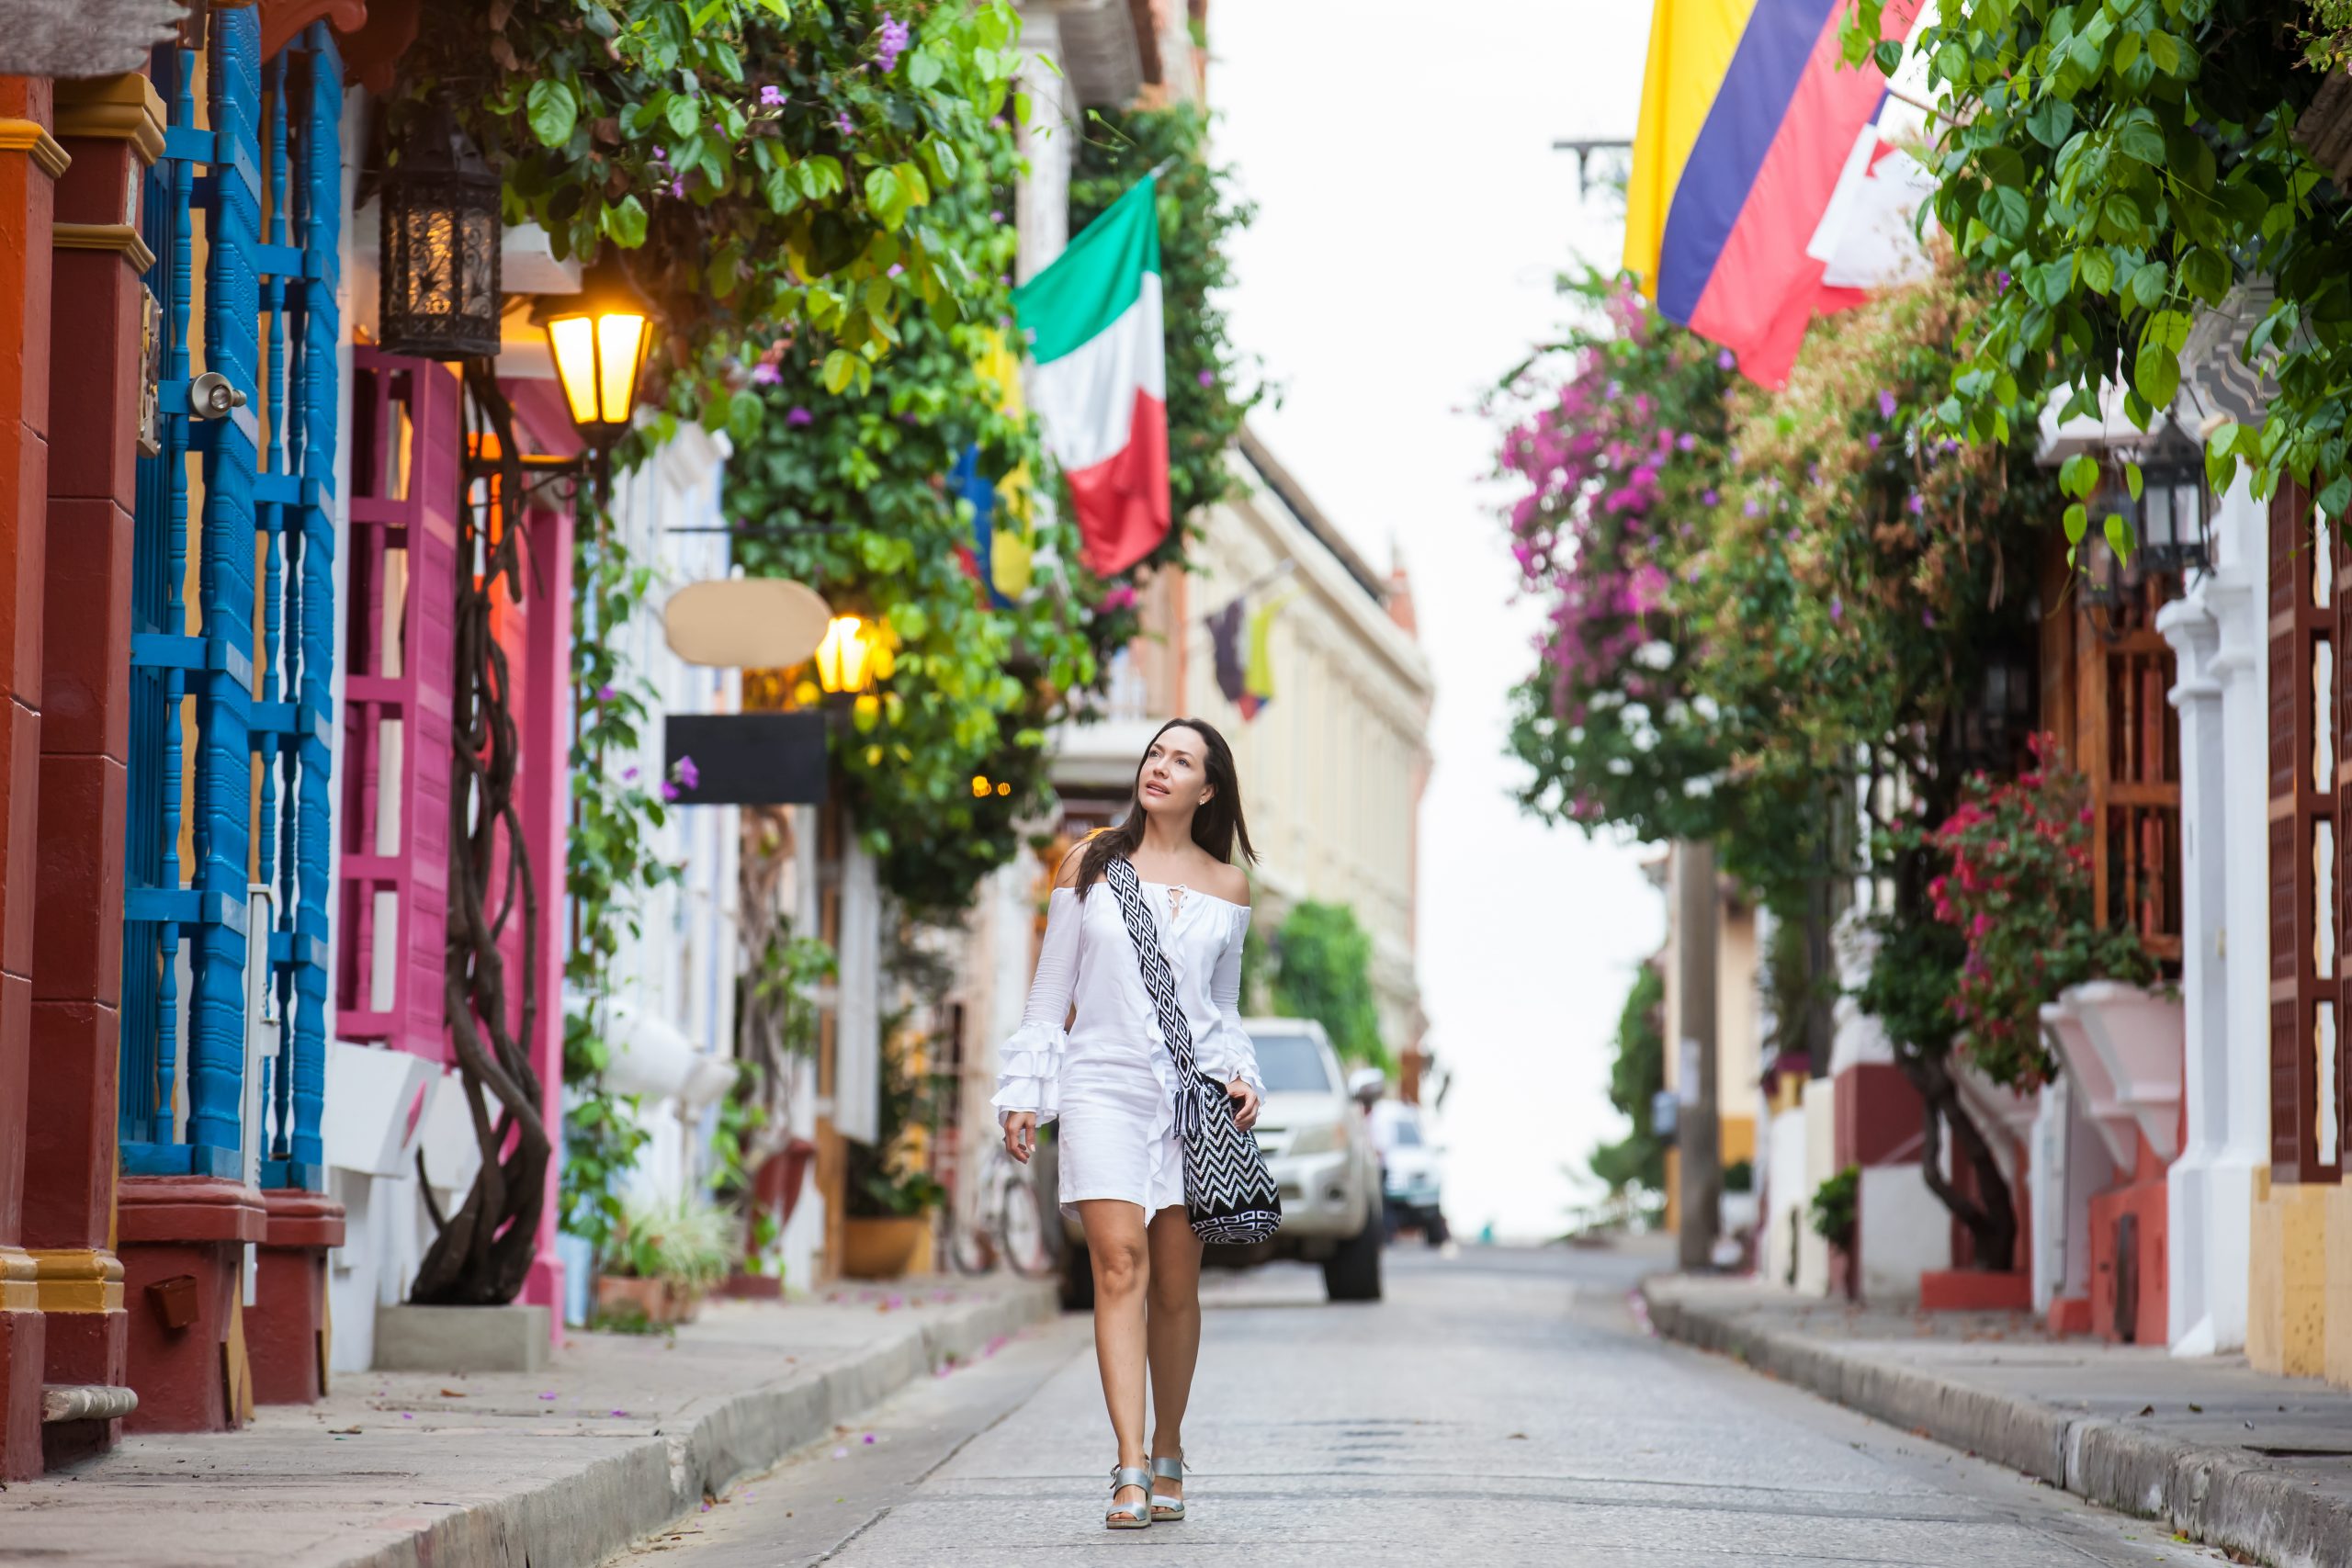 Instgrammable Spots in the Old Walled City and Getsemaní